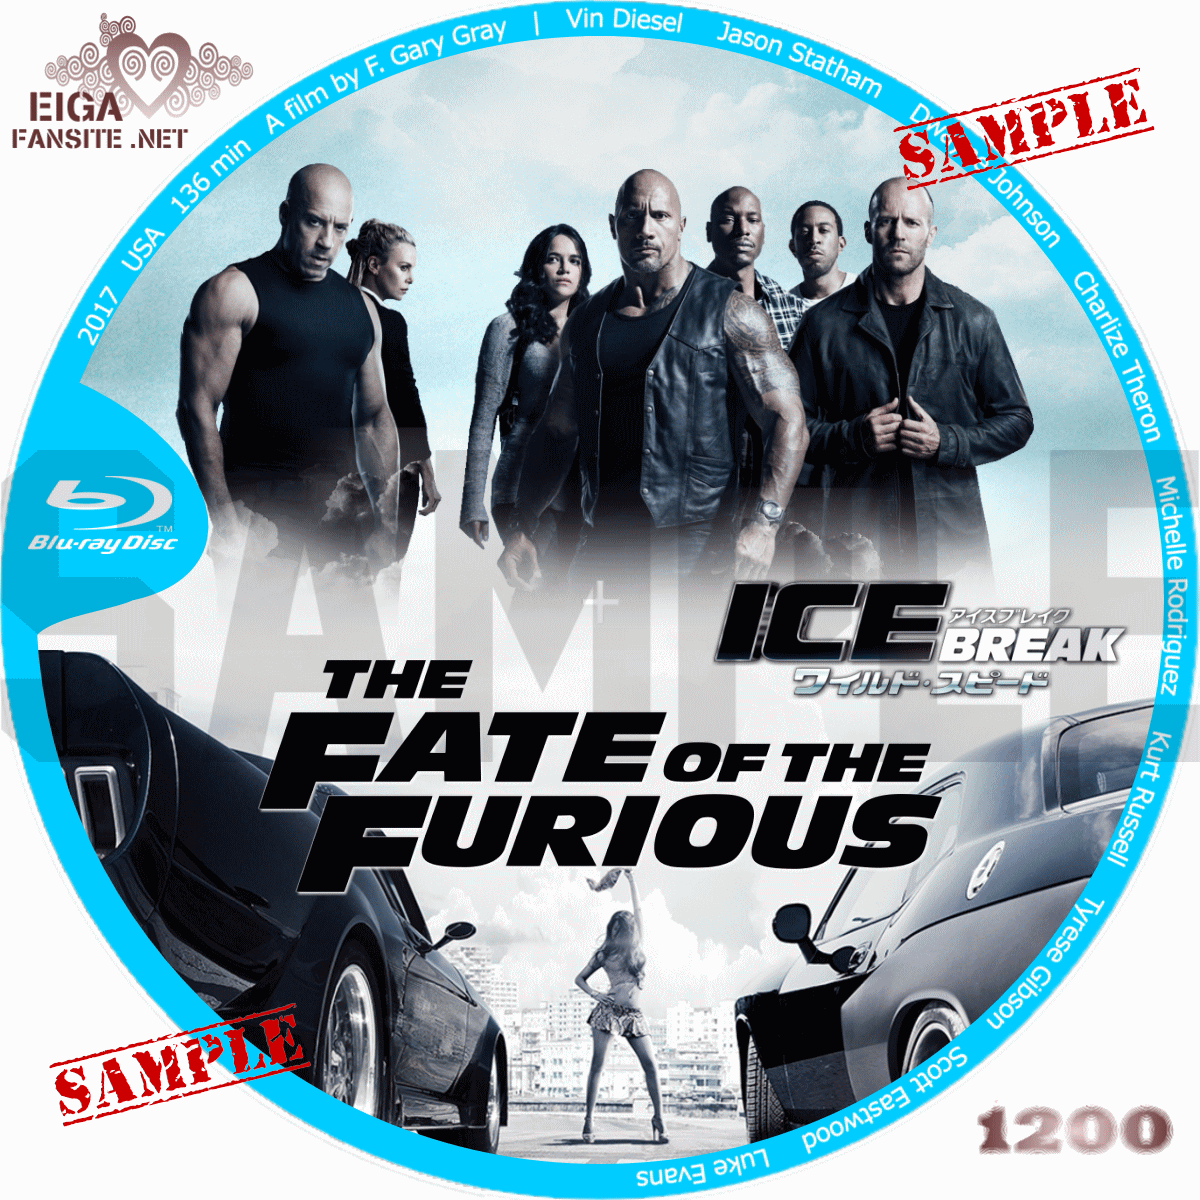 The Fate of the Furious downloading